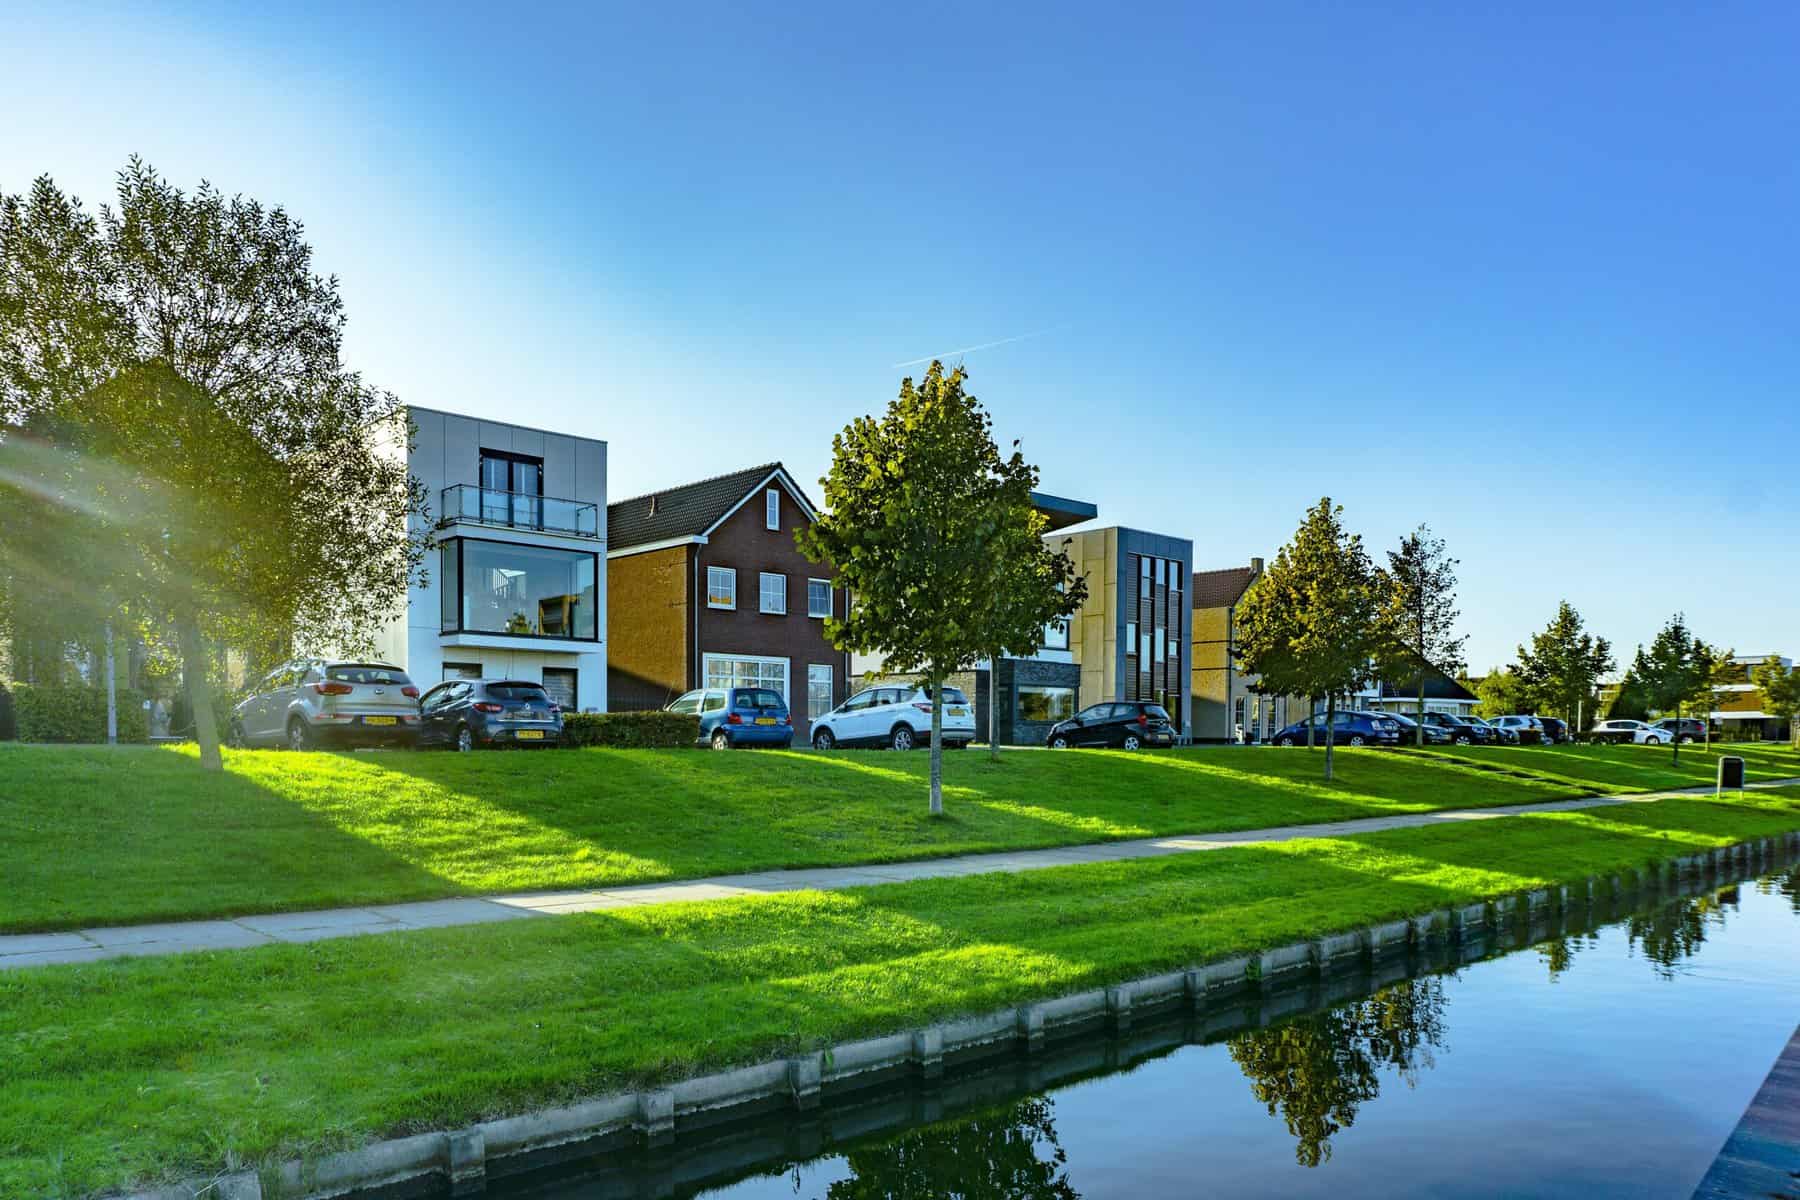 Row of houses on a grassy length that runs parallel with a water front.